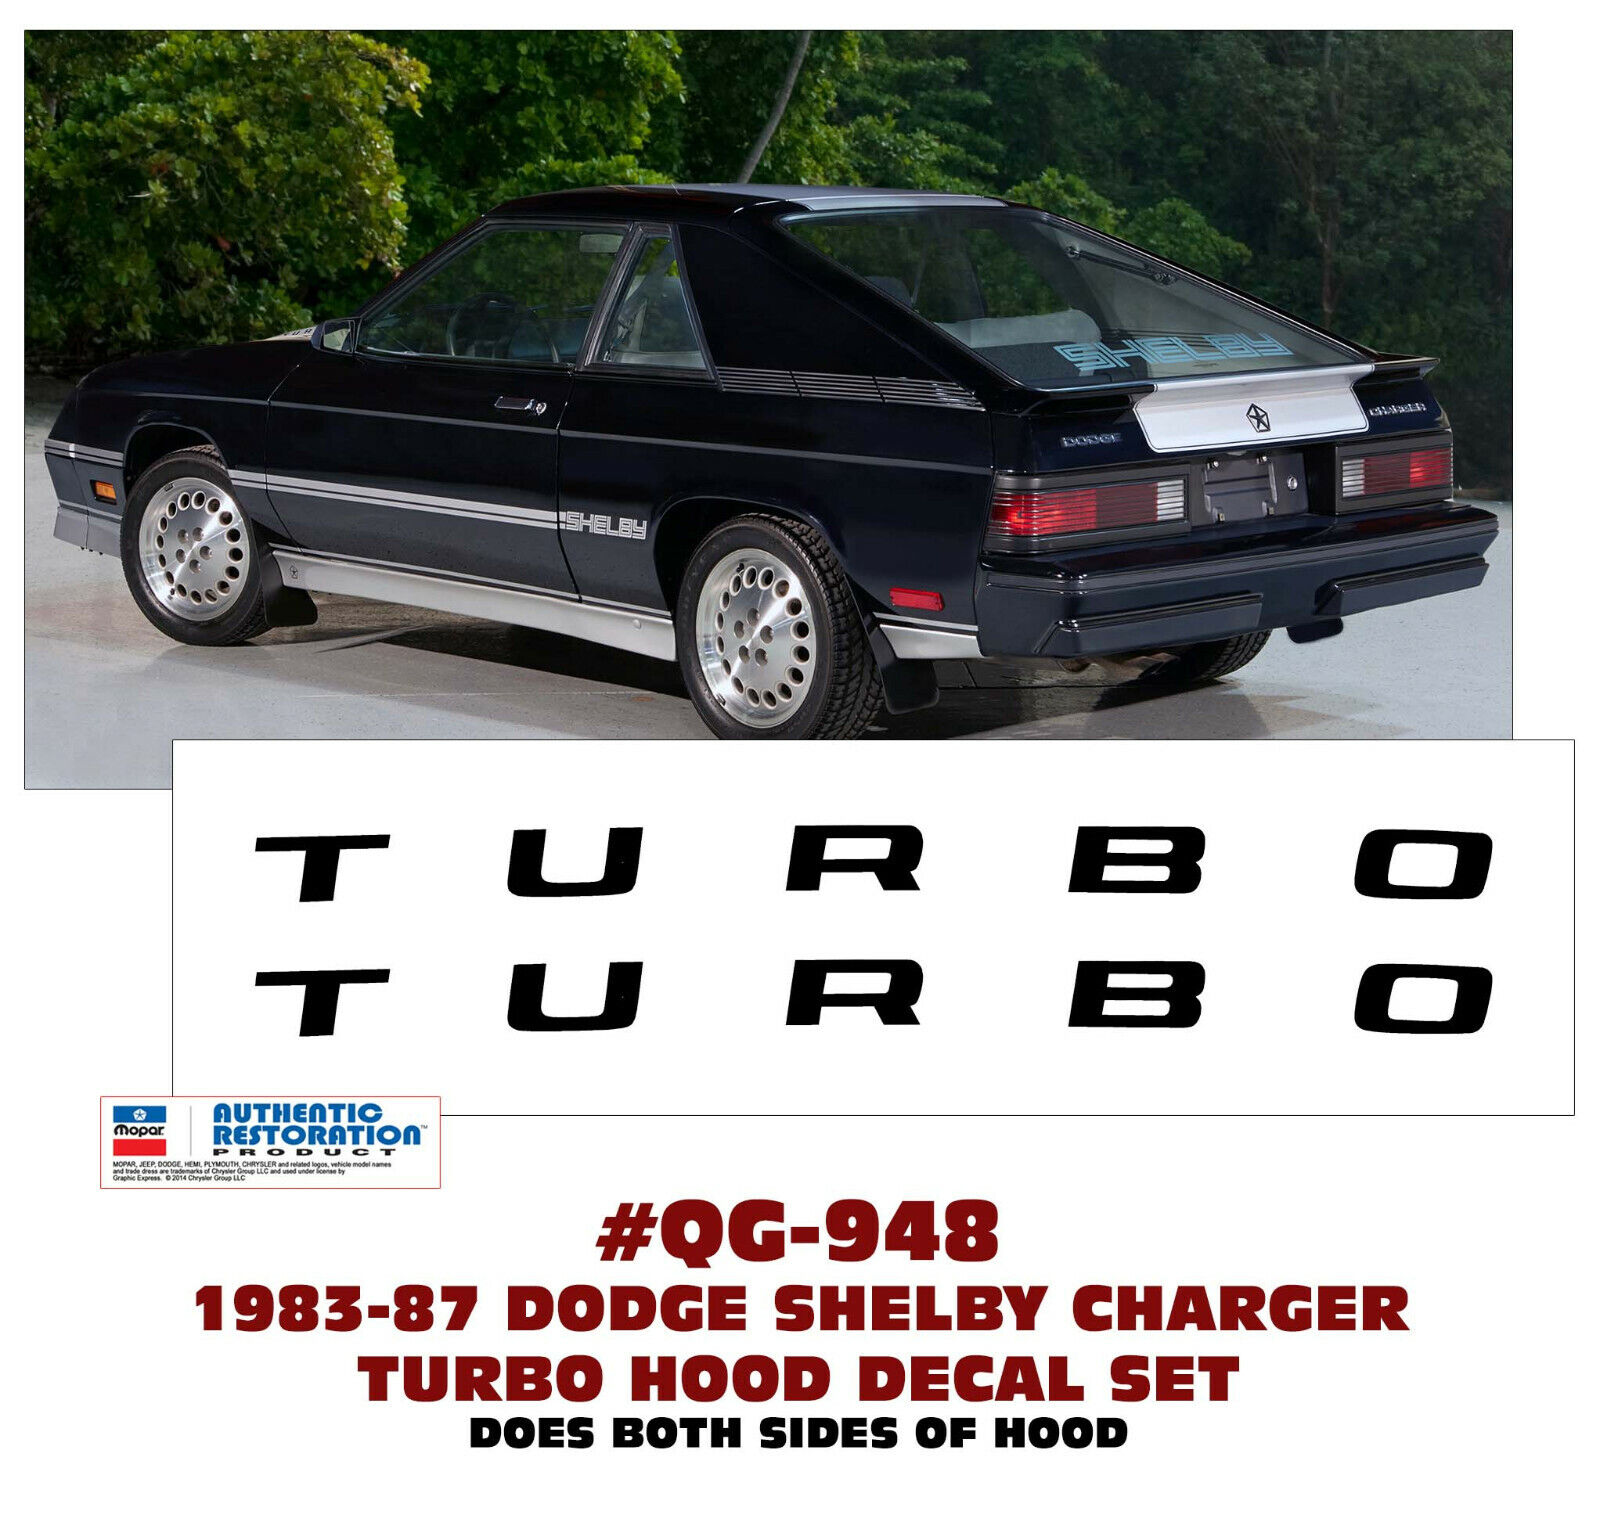 QG-948 1983-87 DODGE SHELBY CHARGER - TURBO HOOD DECAL SET - LICENSED